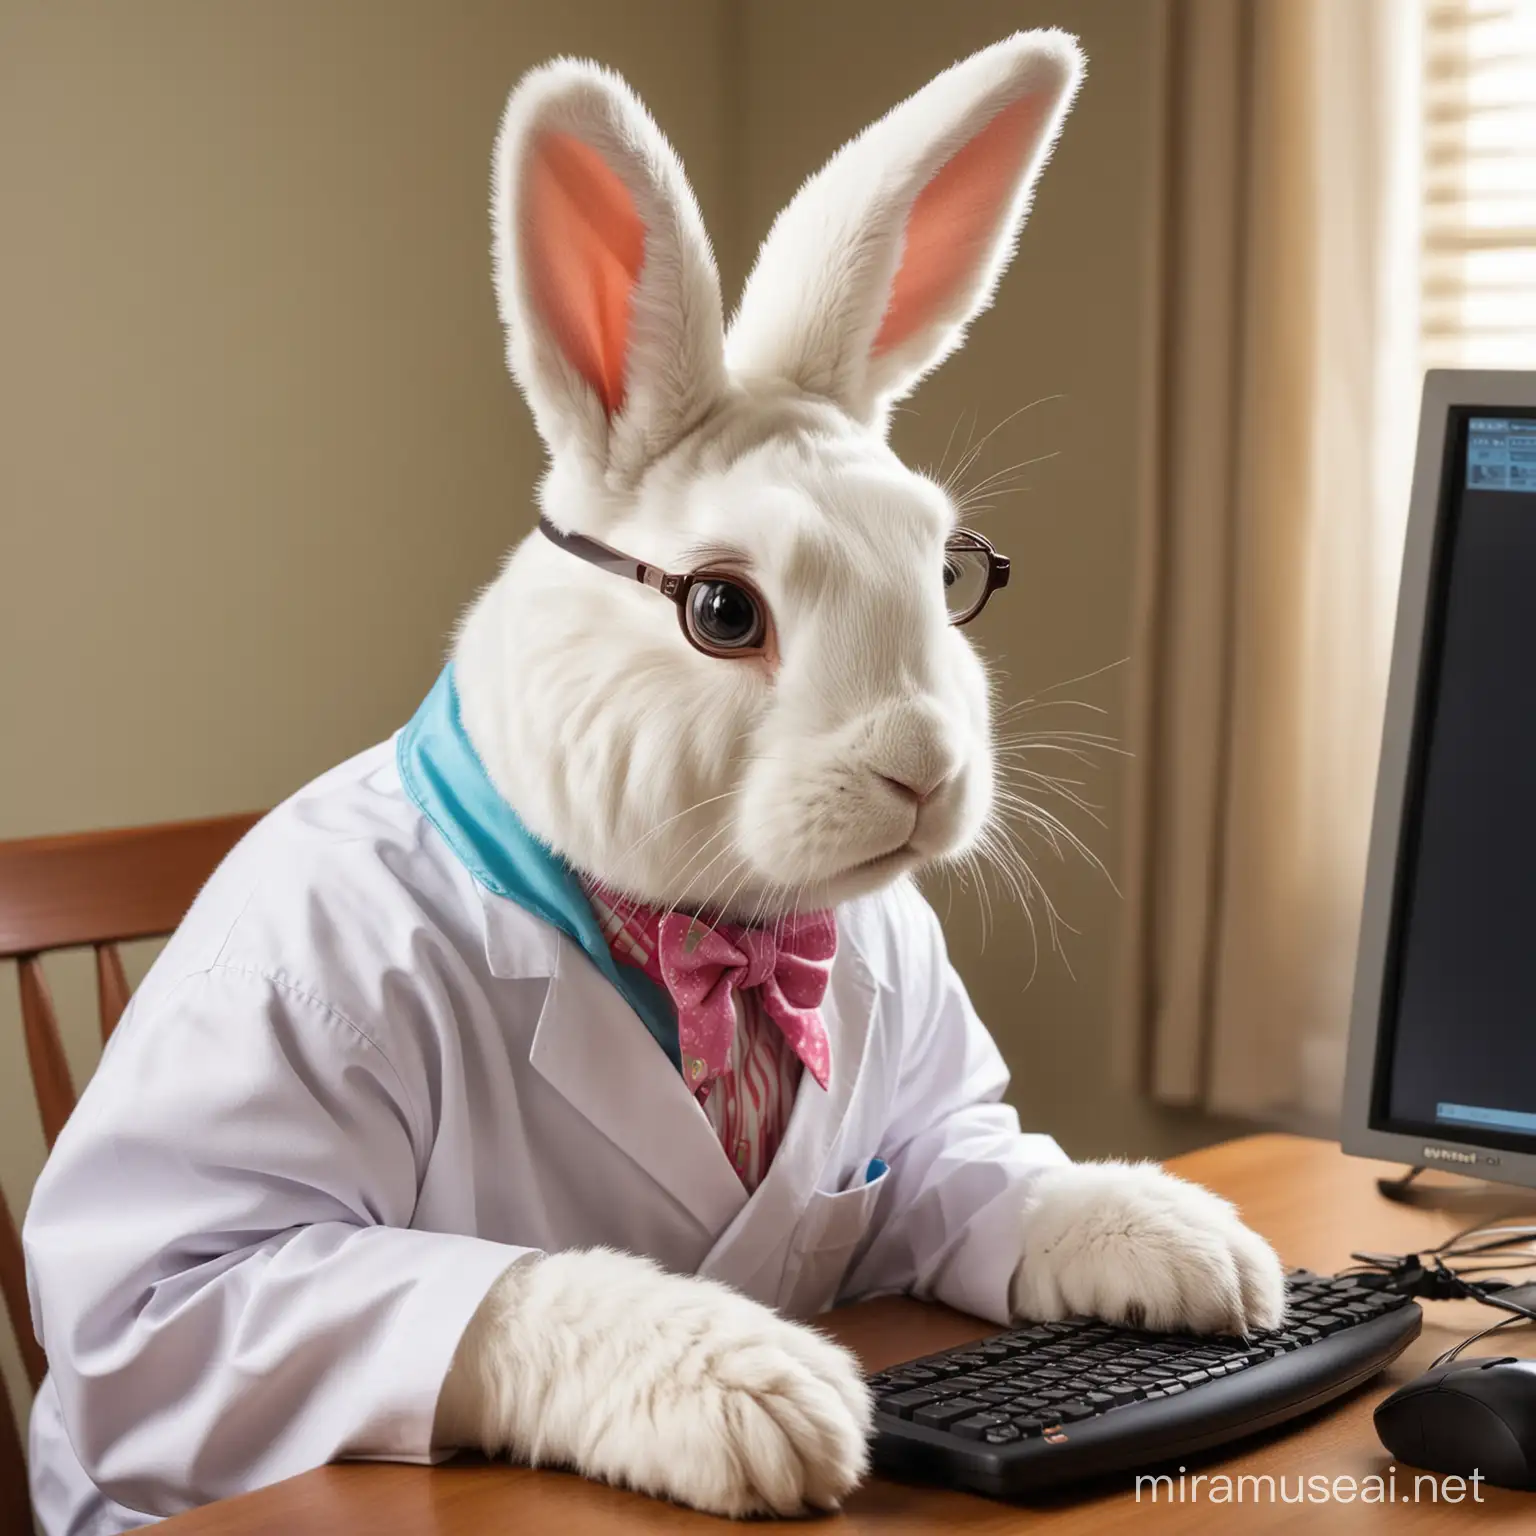 The Easter Bunny is a computer scientist in civilian life

